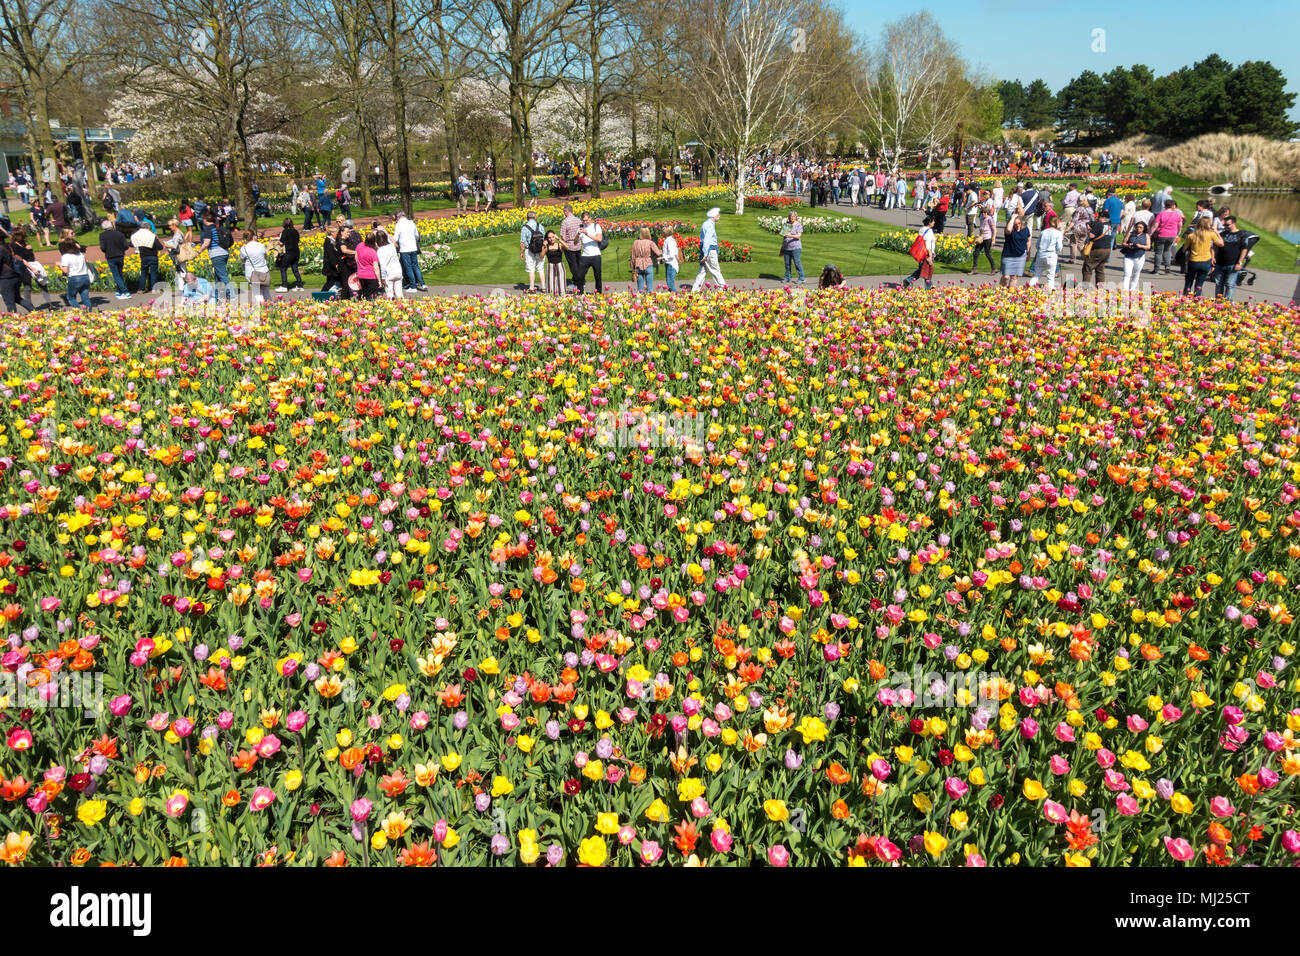 Keukenhof Flower Gardens in Lisse near Amsterdam Mixed Tulips in a colorful bed. Stock Photo